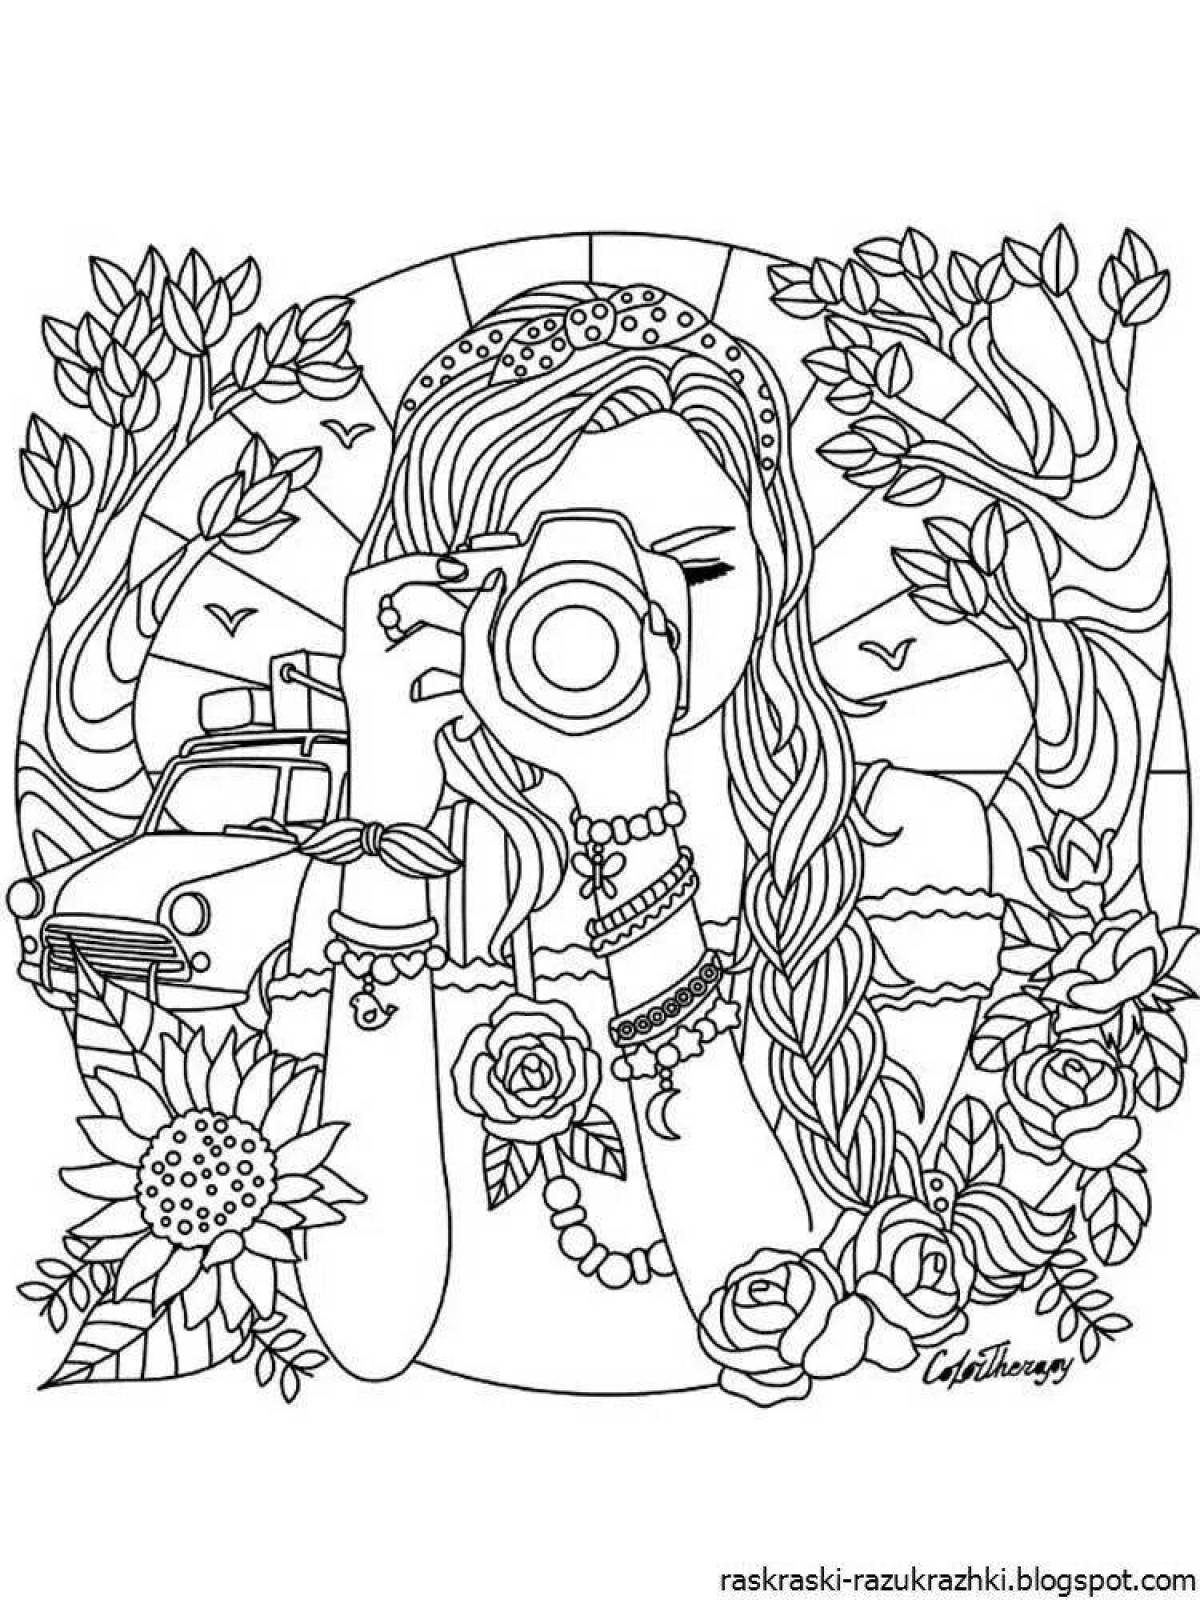 Adorable coloring book for girls 13-14 years old